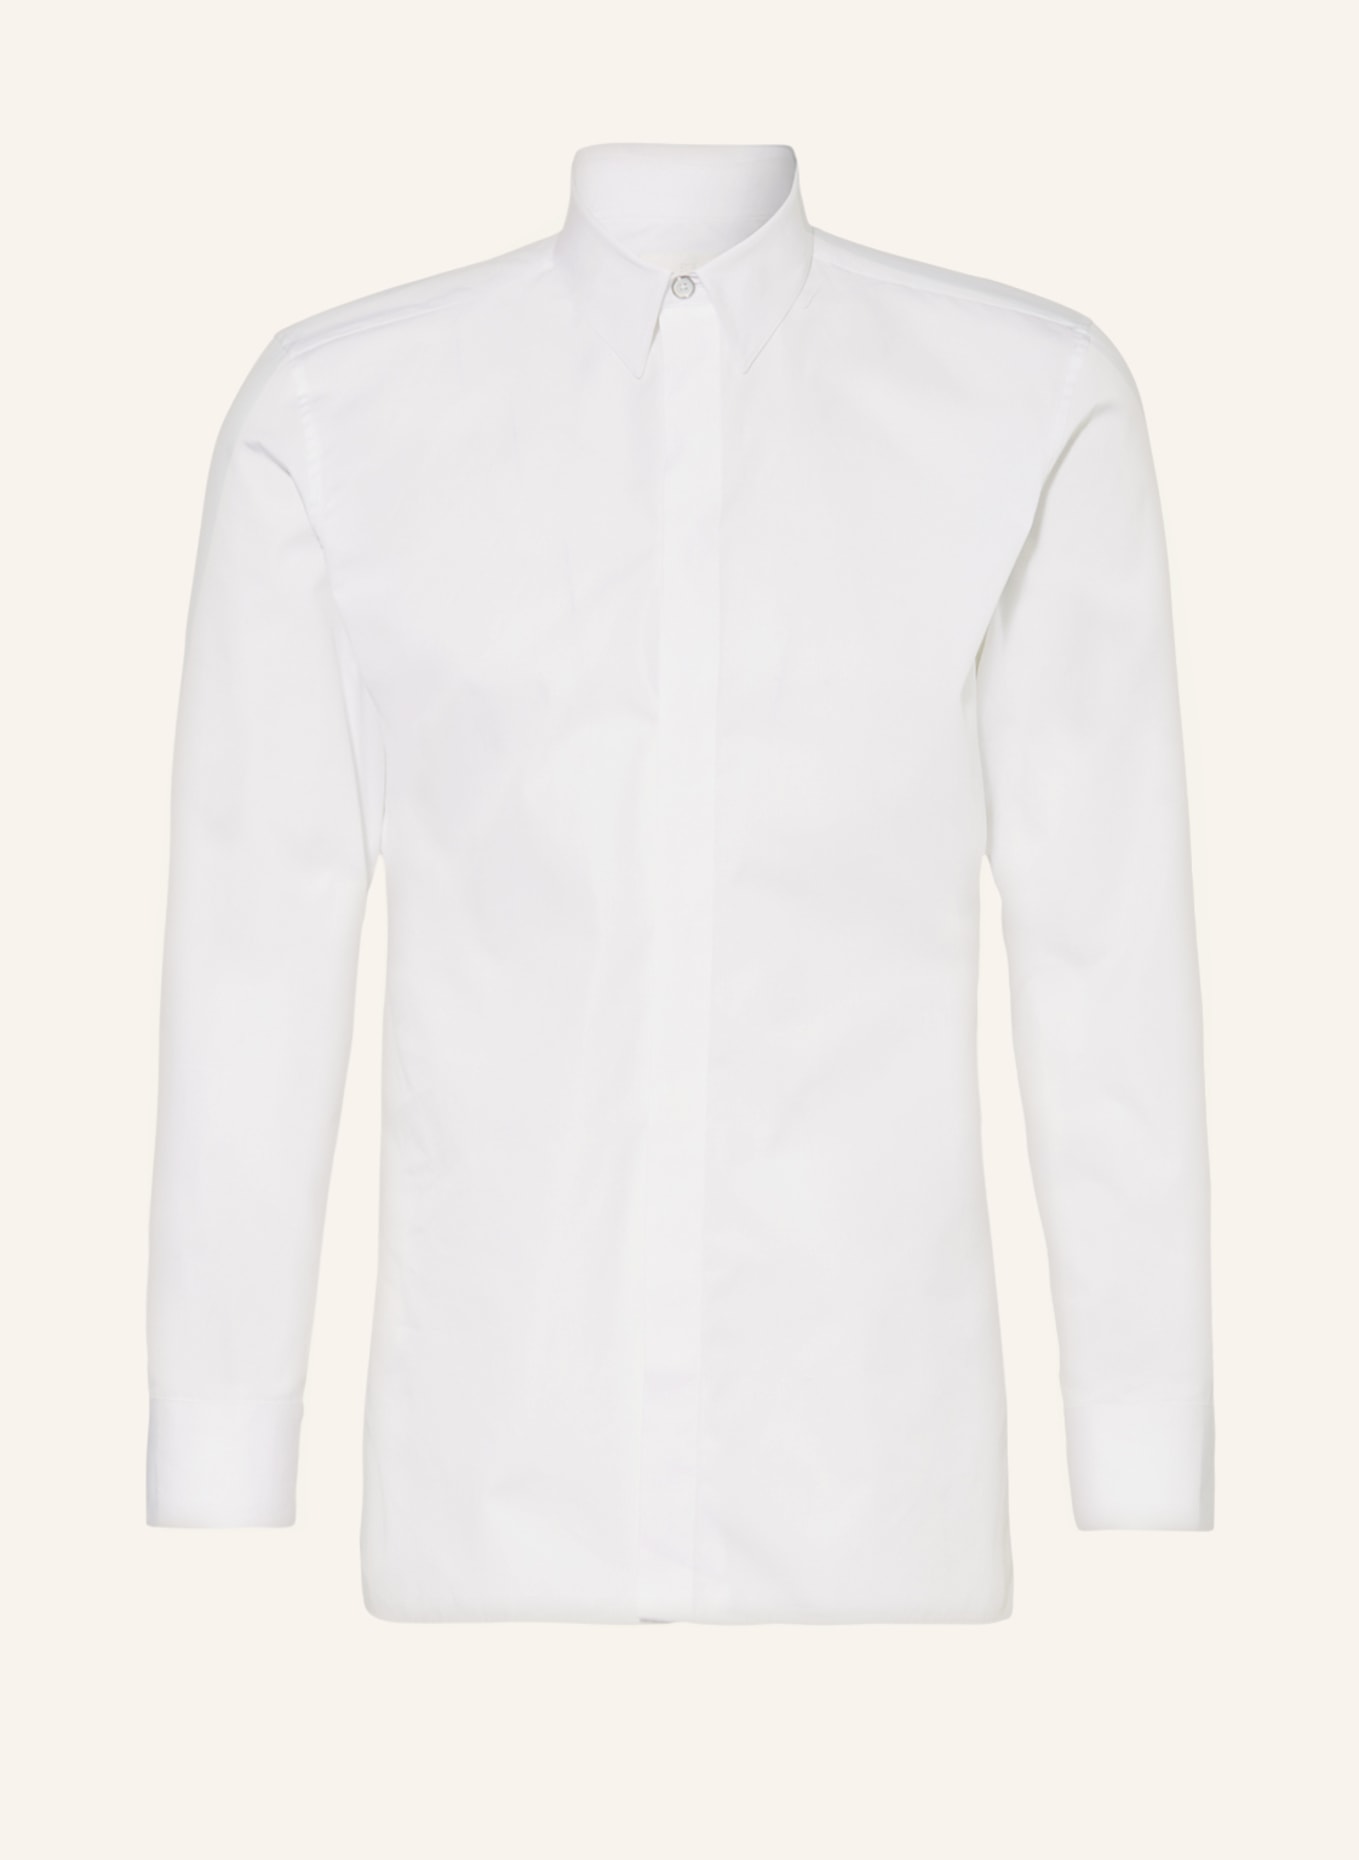 GIVENCHY Hemd Contemporary Fit, Farbe: WEISS (Bild 1)